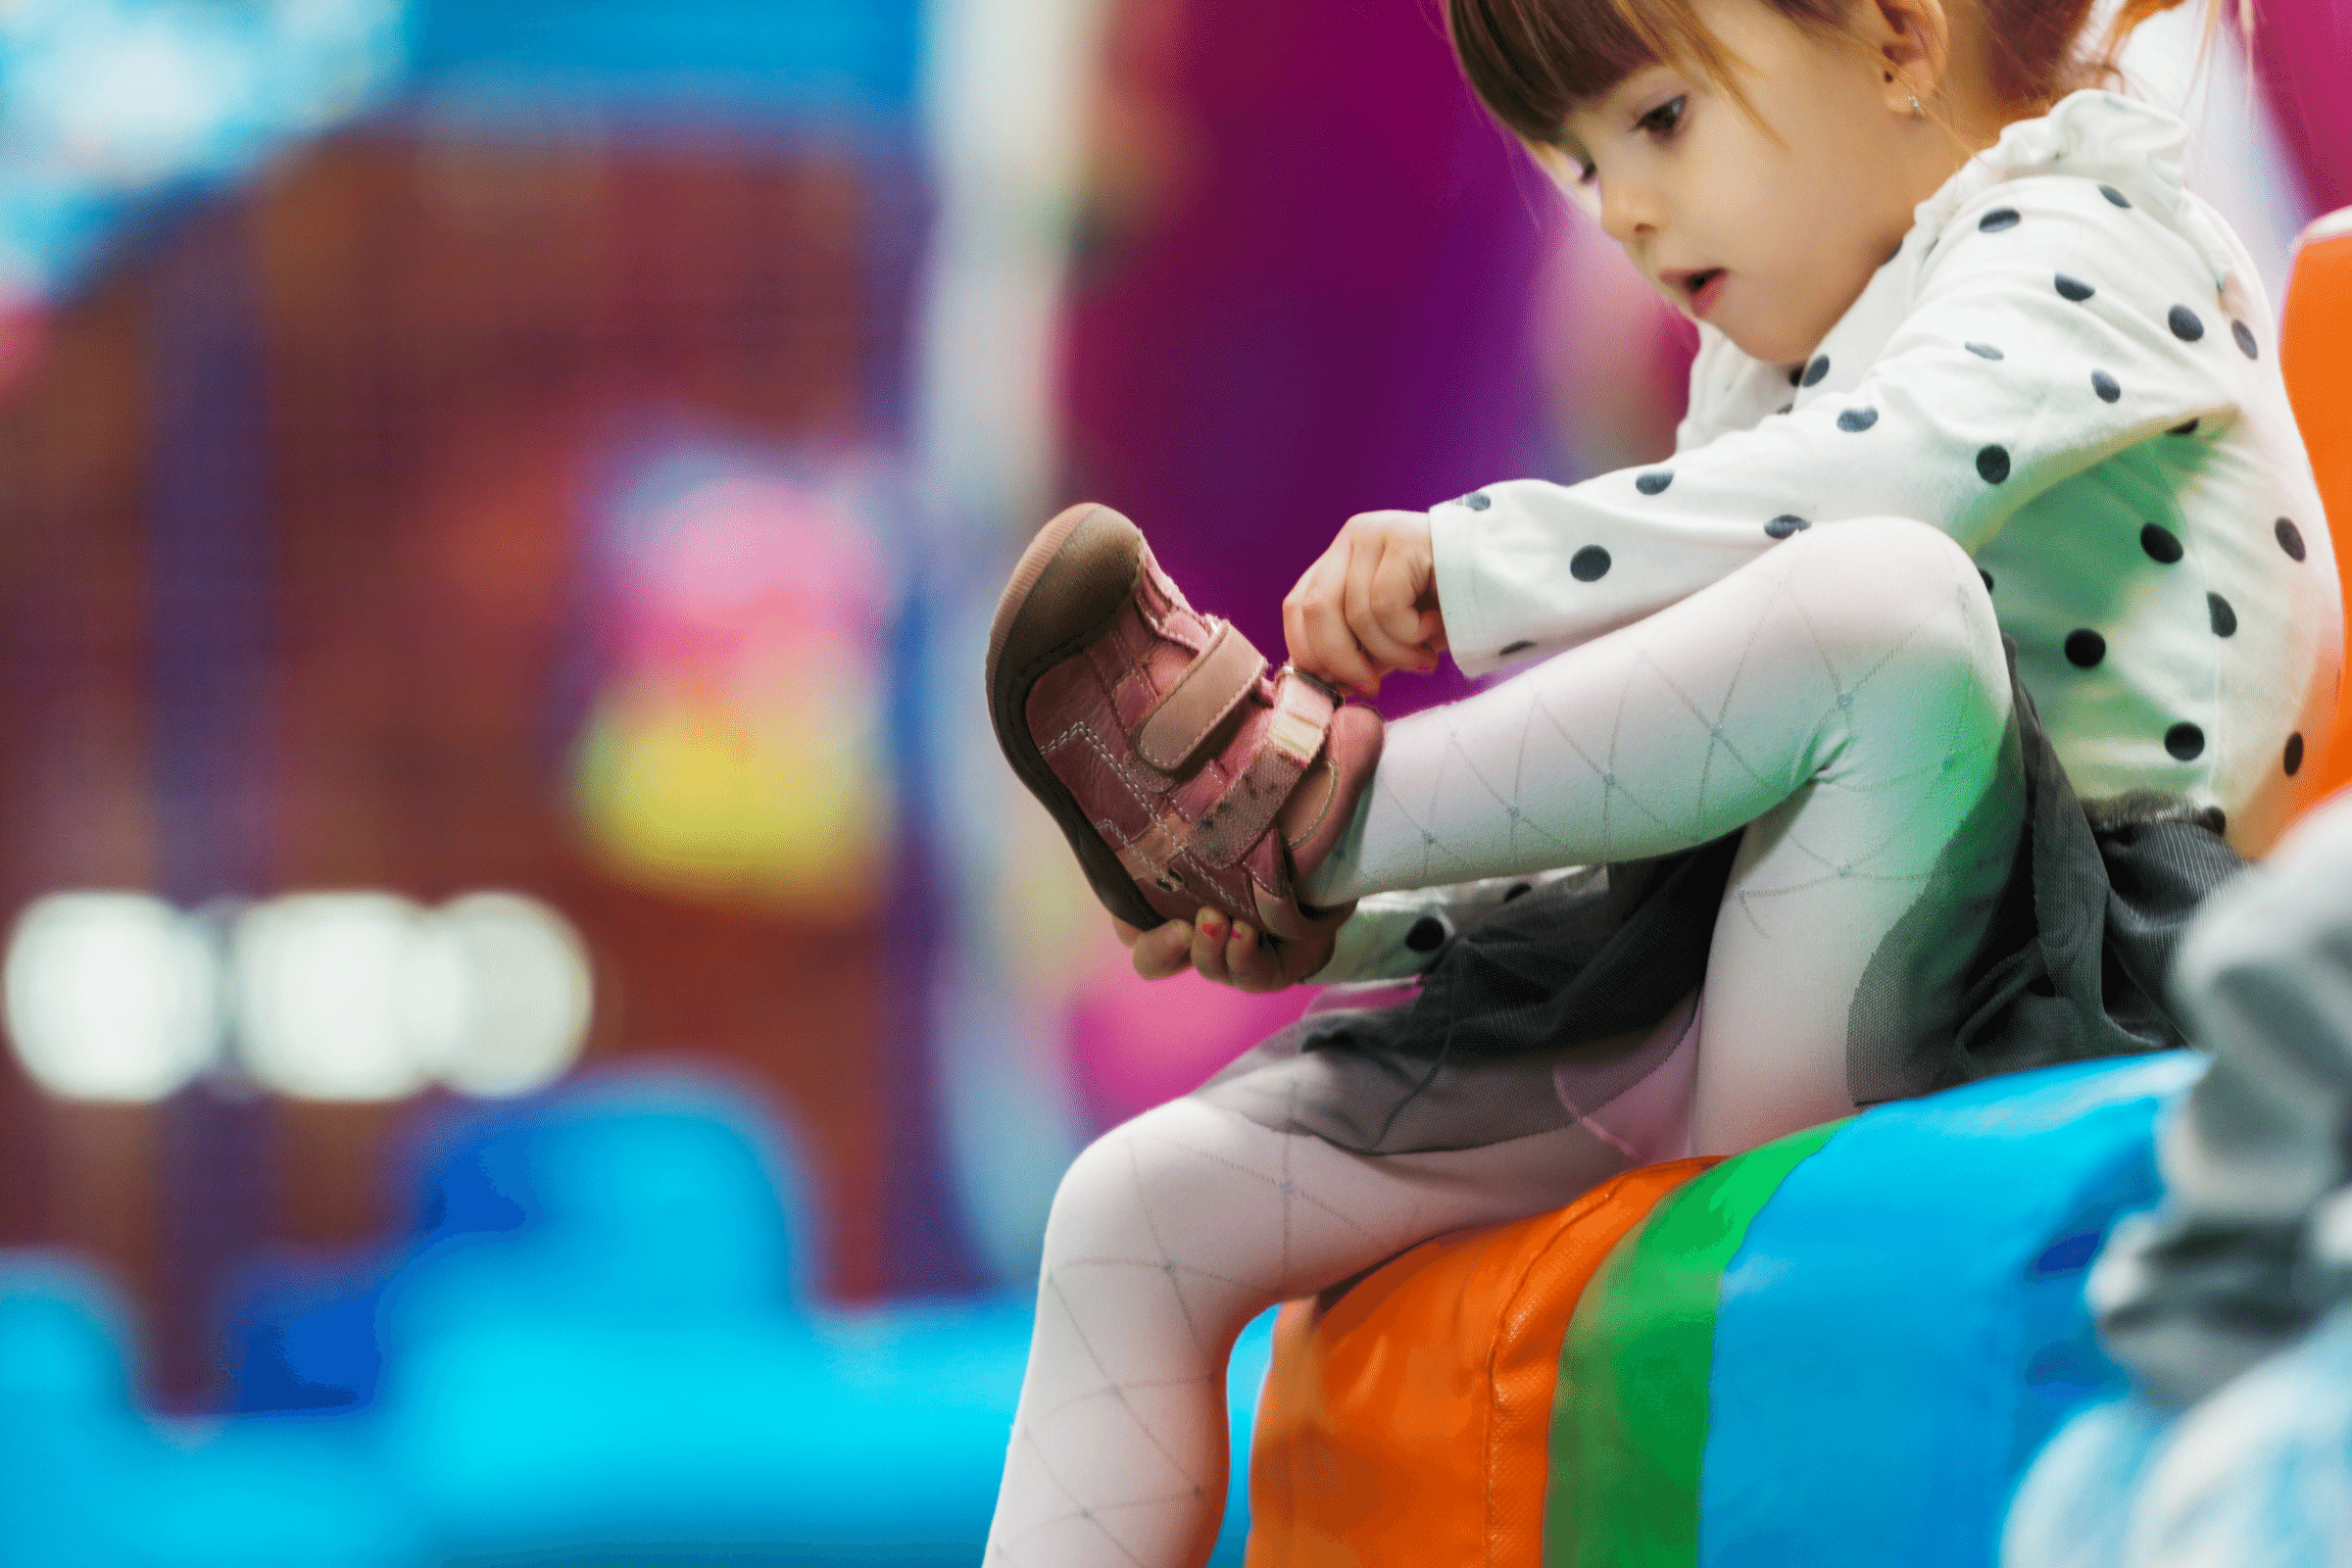 Young girl putting on shoes